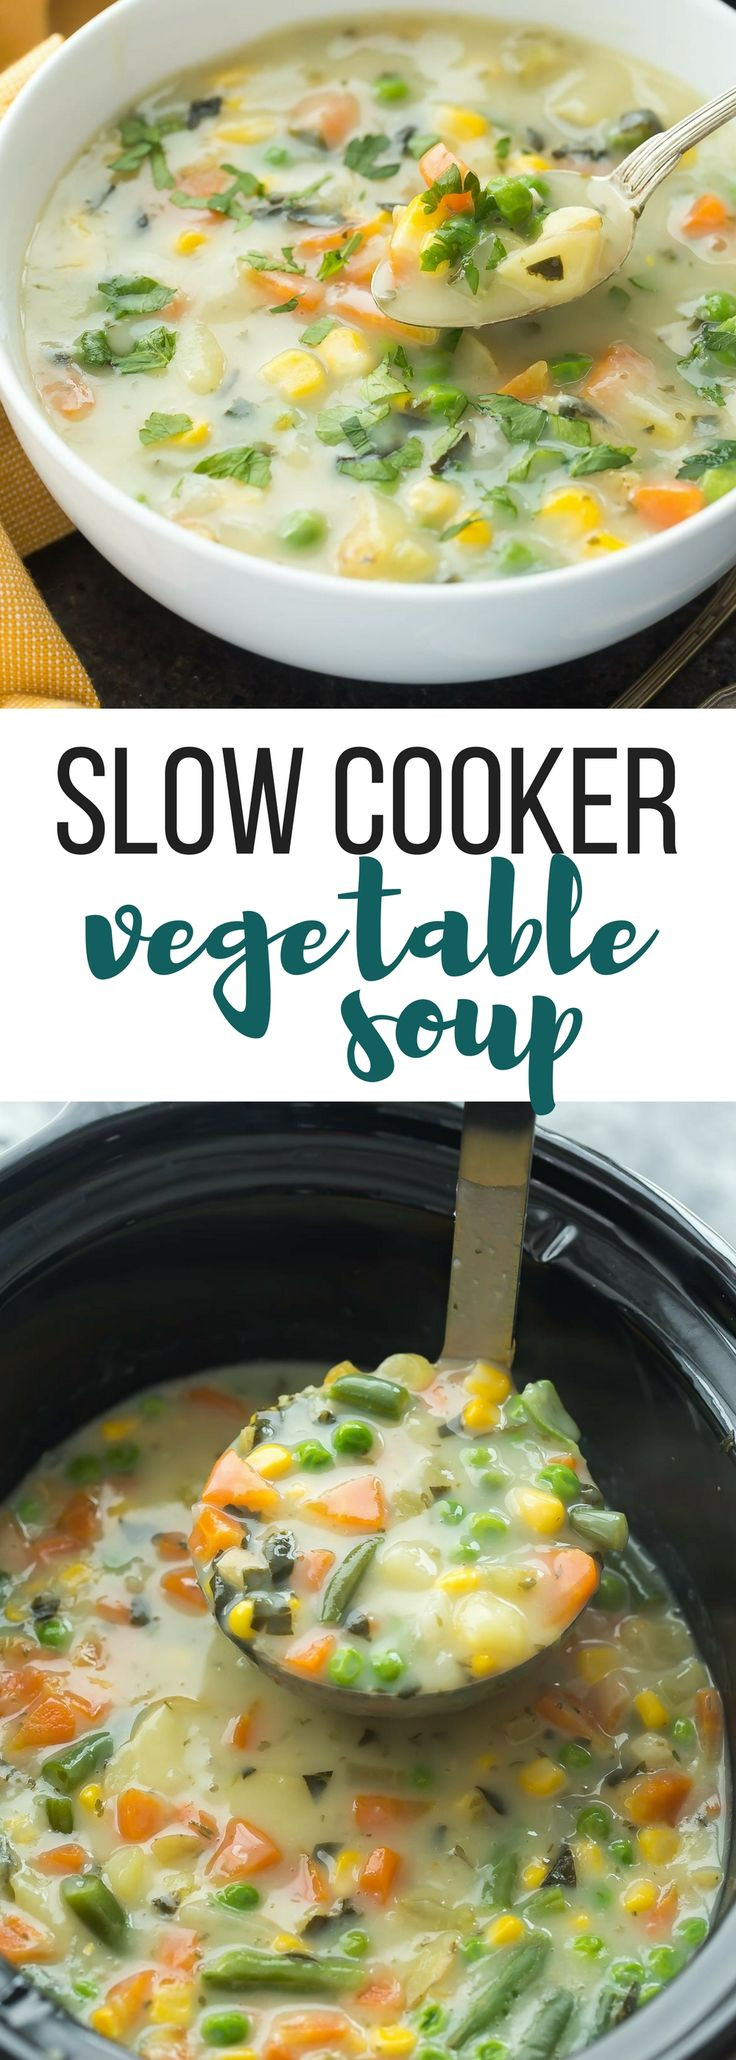 Slow Cooker Vegetable Soup Recipes Healthy
 This Slow Cooker Creamy Ve able Soup is a hearty